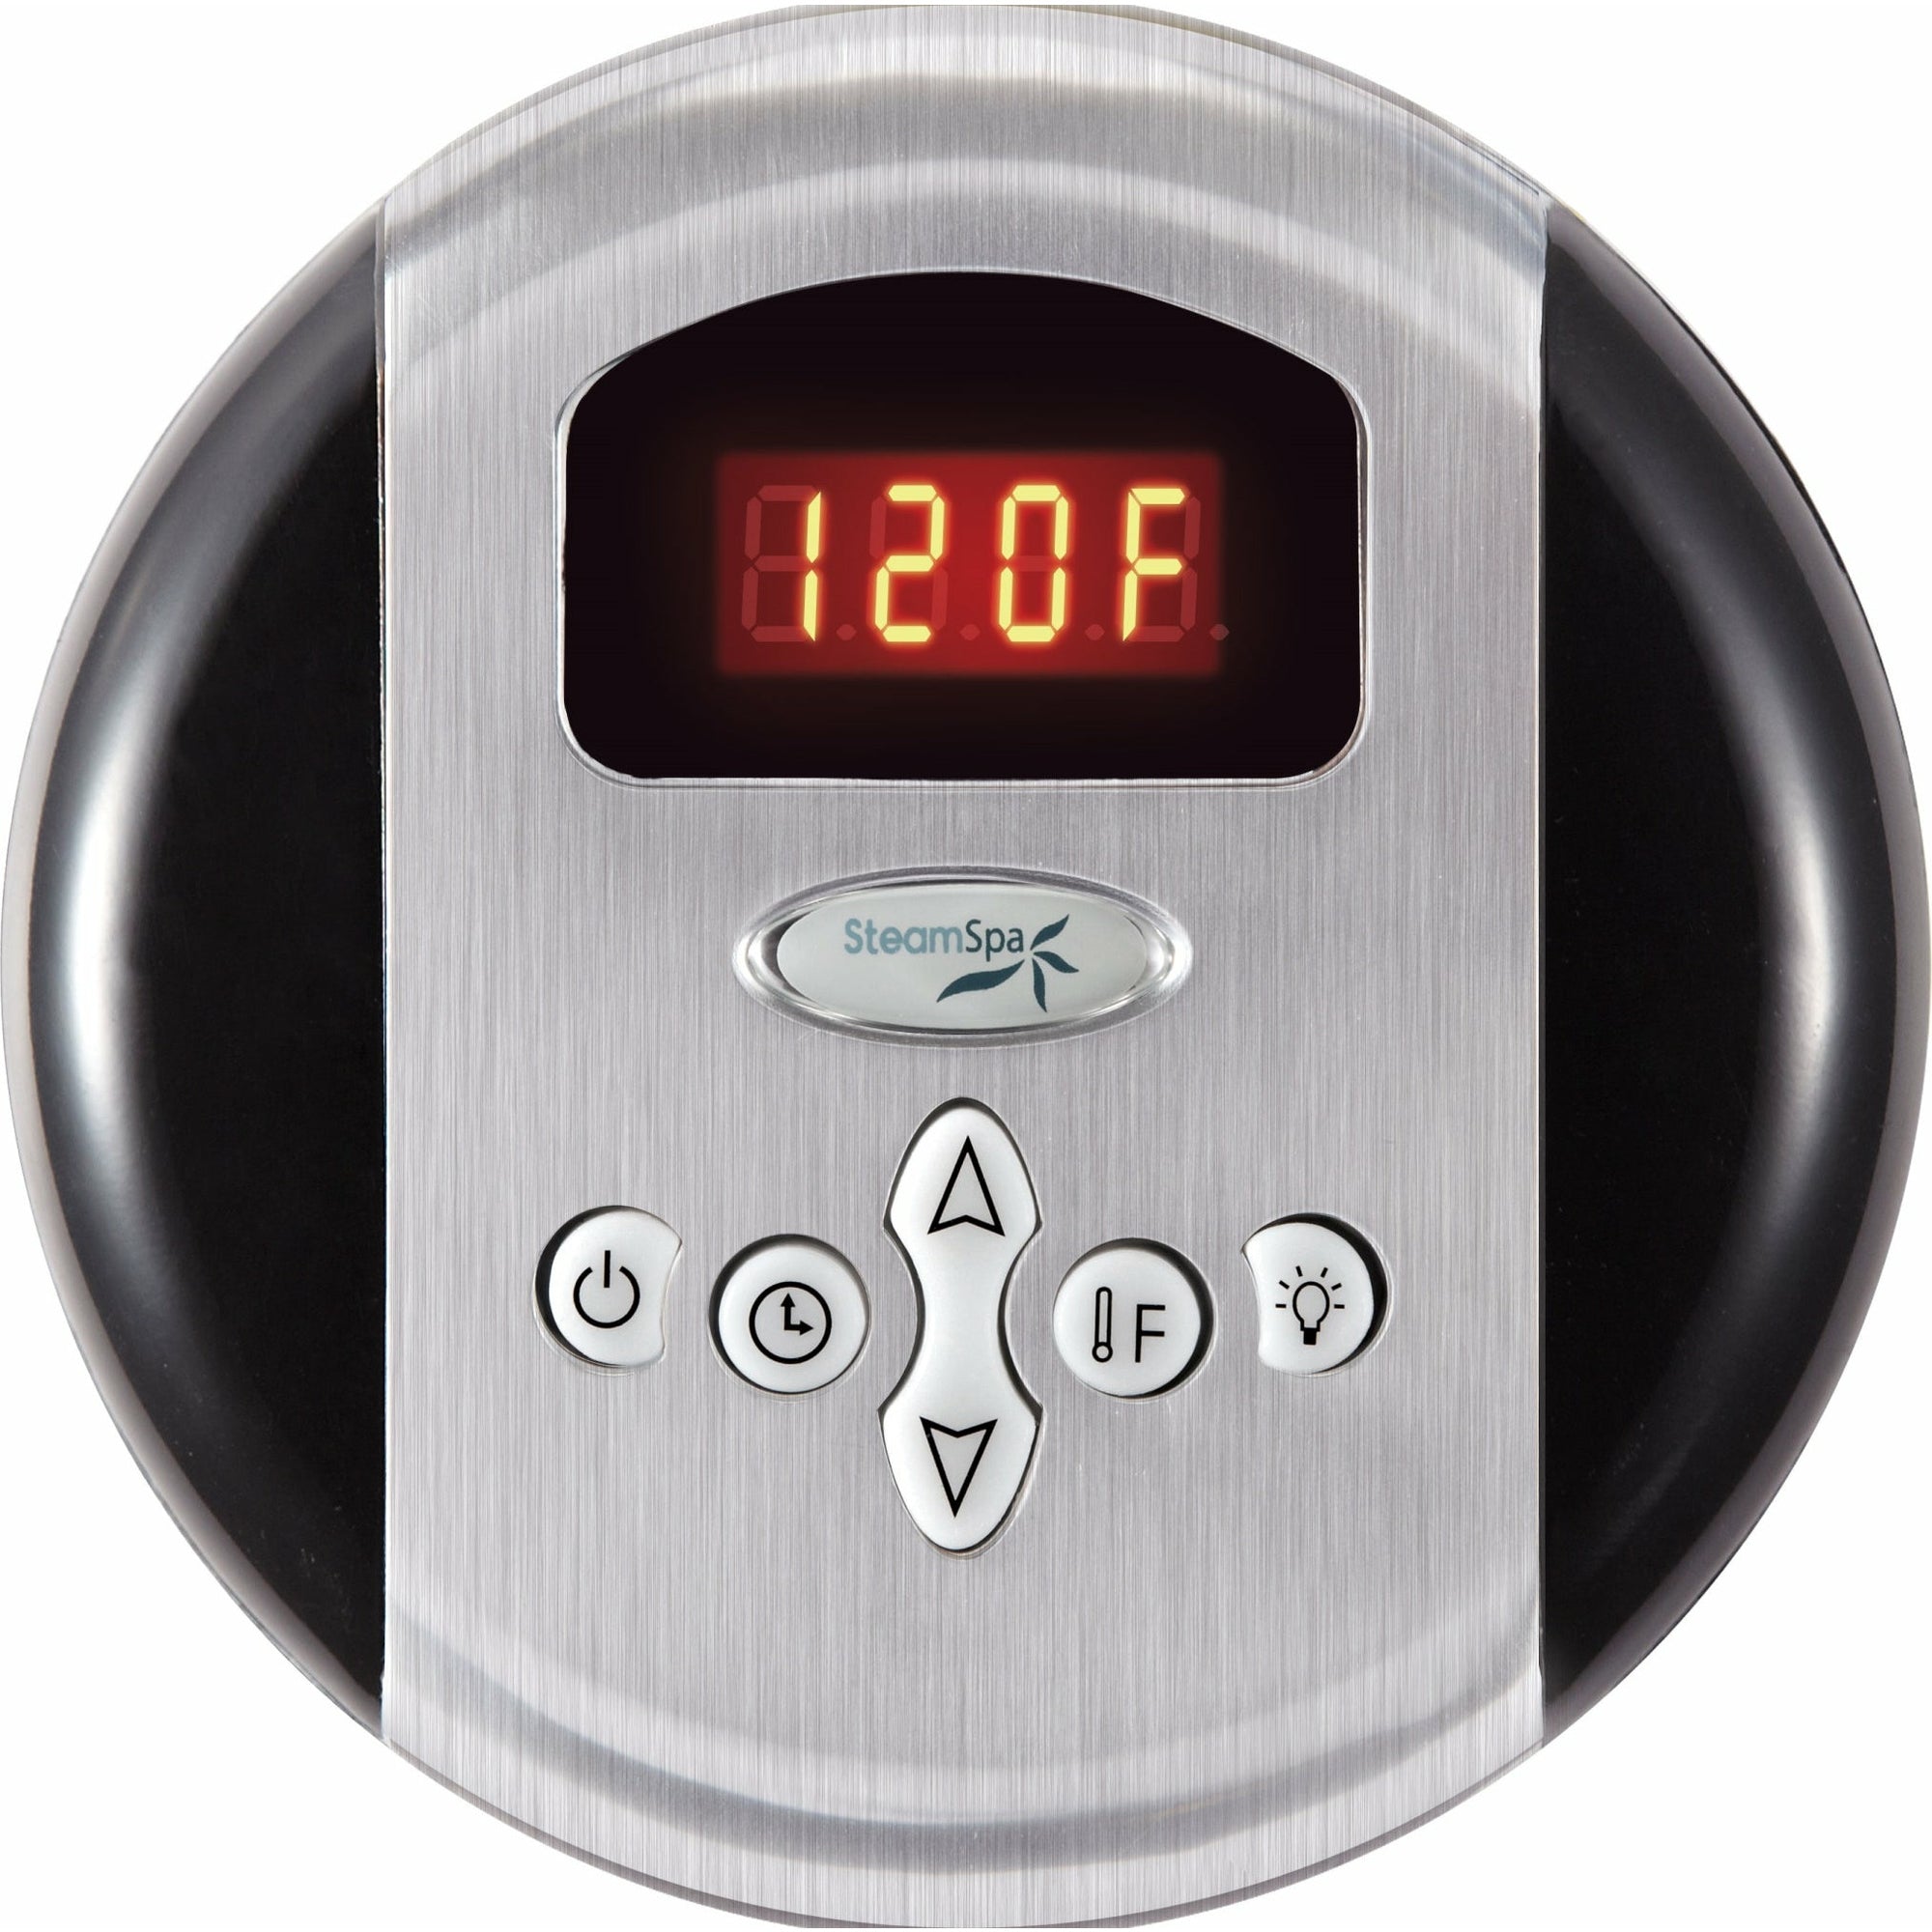 SteamSpa Programmable Control Panel with Presets - Brushed Nickel - Digital readout display and soft touch keypad - G-SC-200 - Vital Hydrotherapy